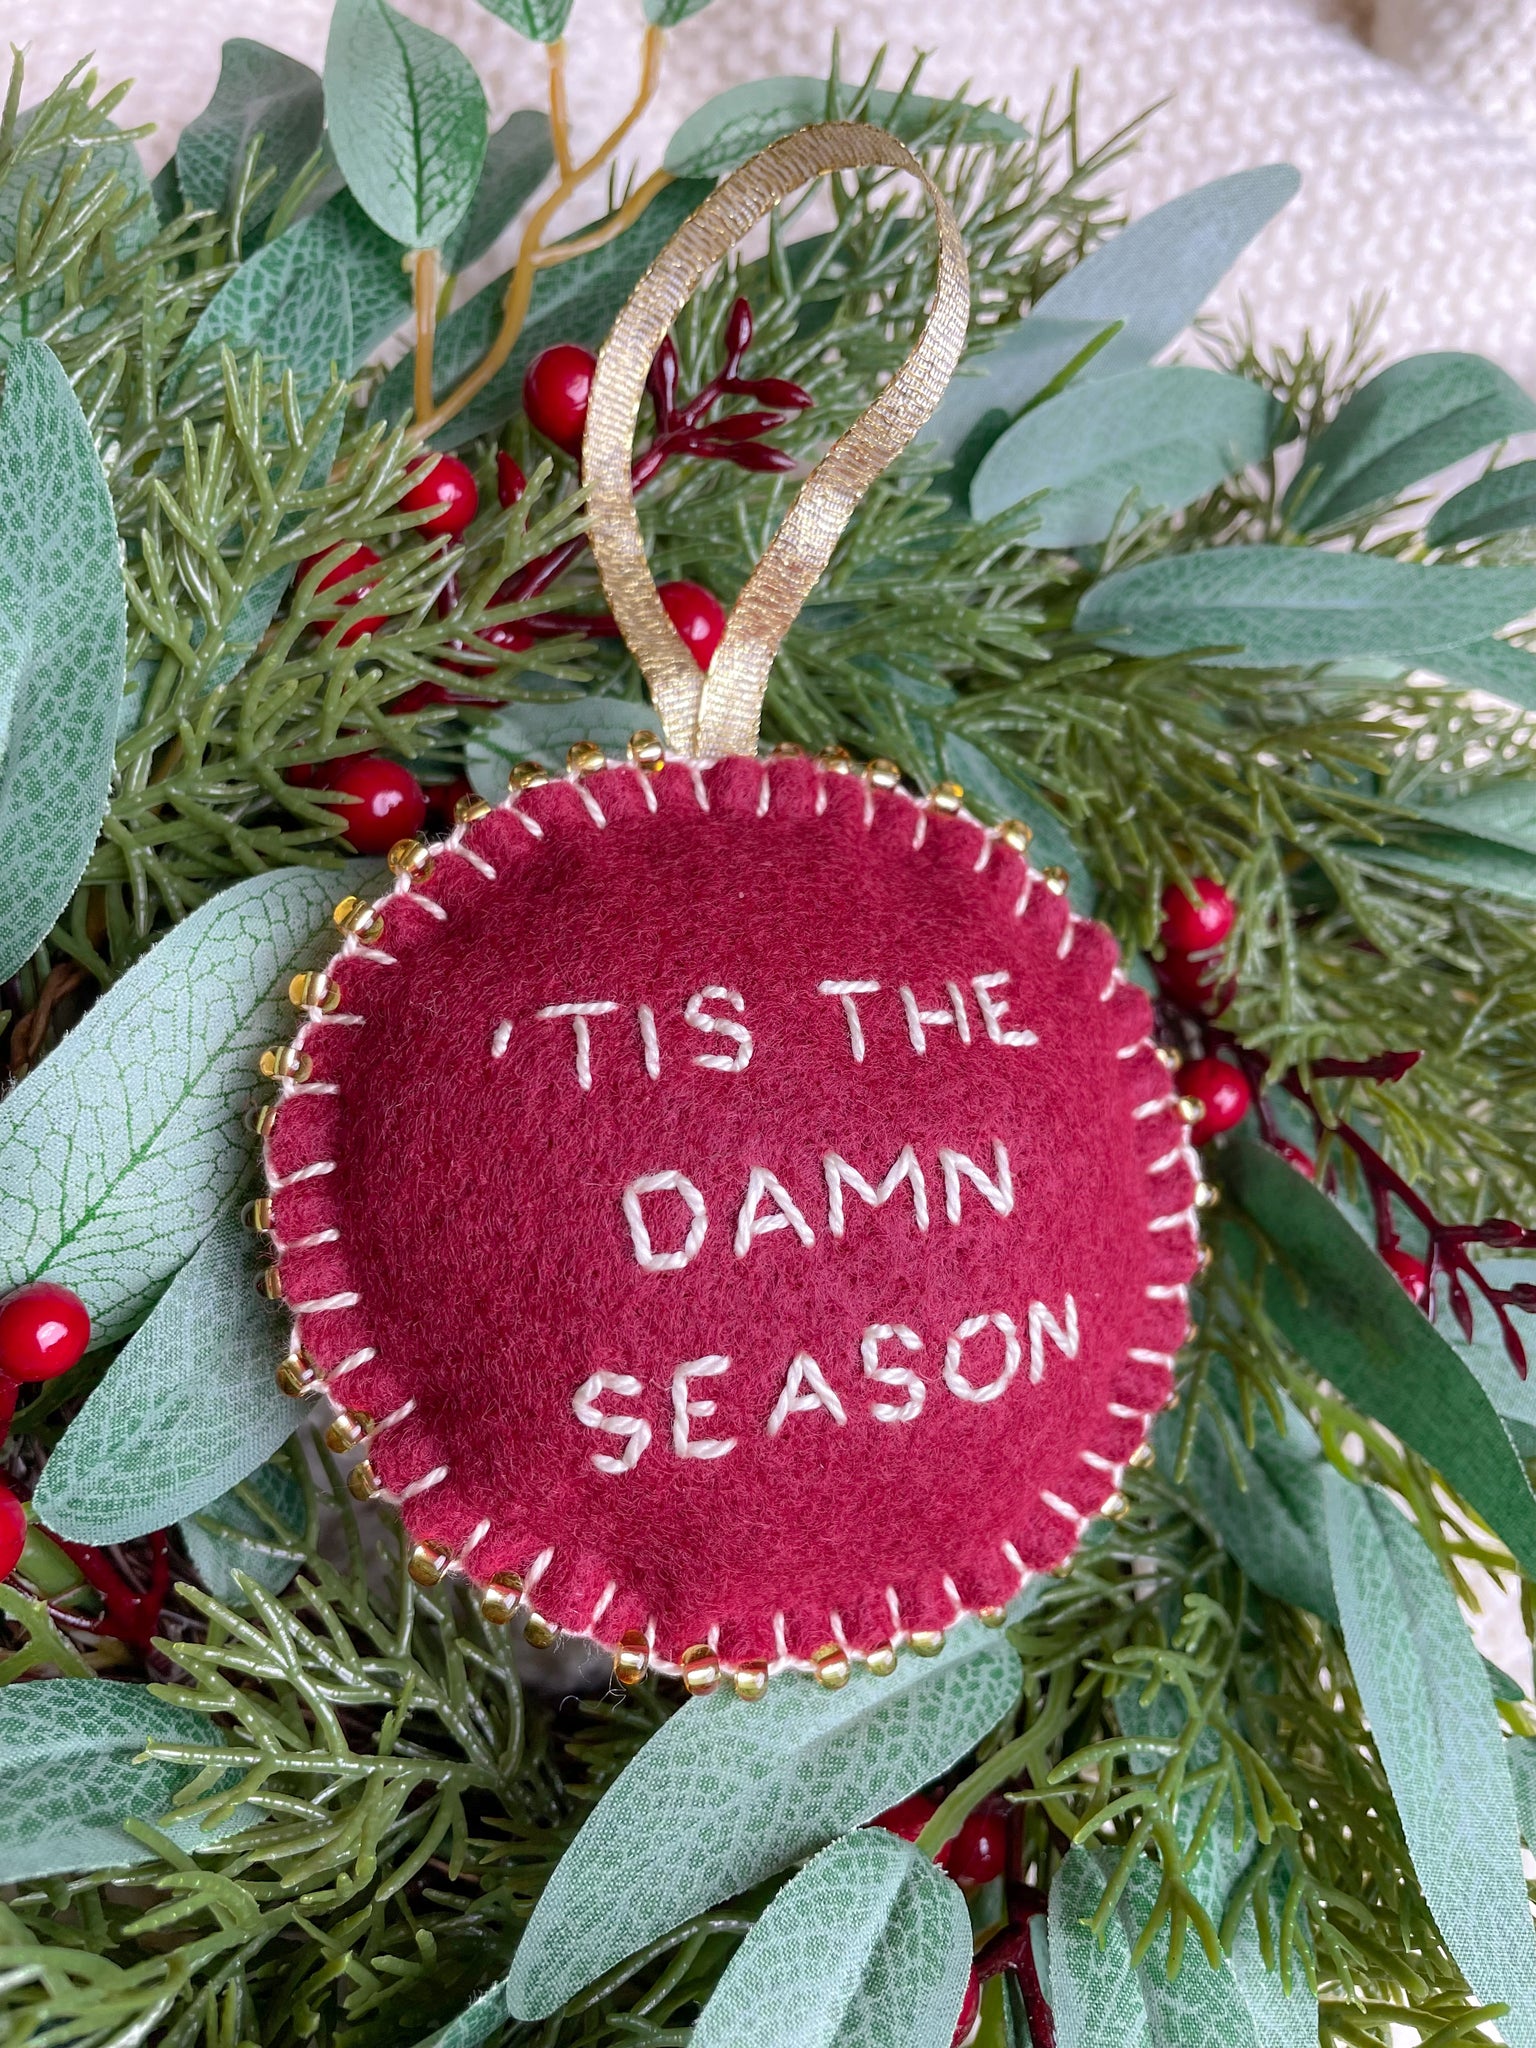 Tis the Damn Season and Merry Swiftmas Hand Embroidered Ornaments